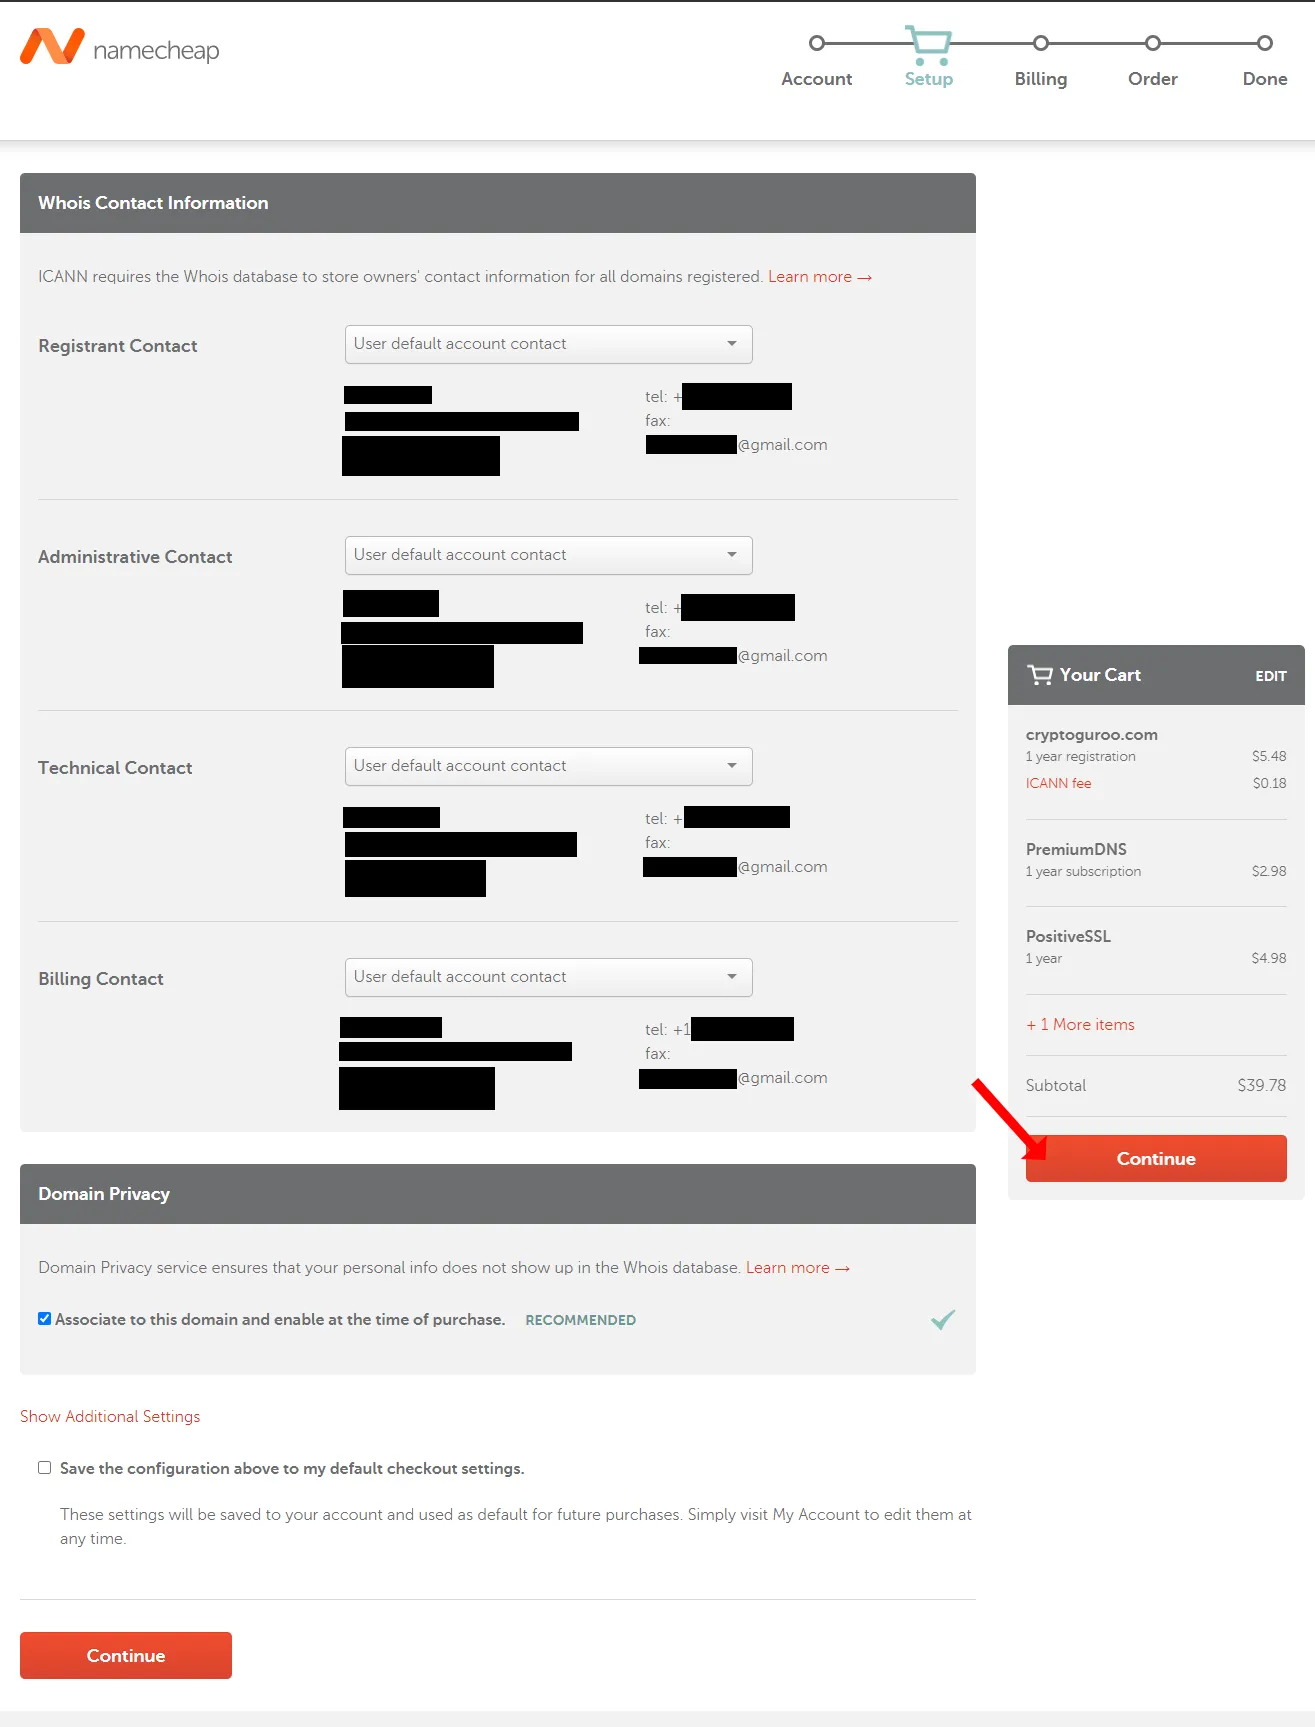 Preview your Namecheap Account Contact Information